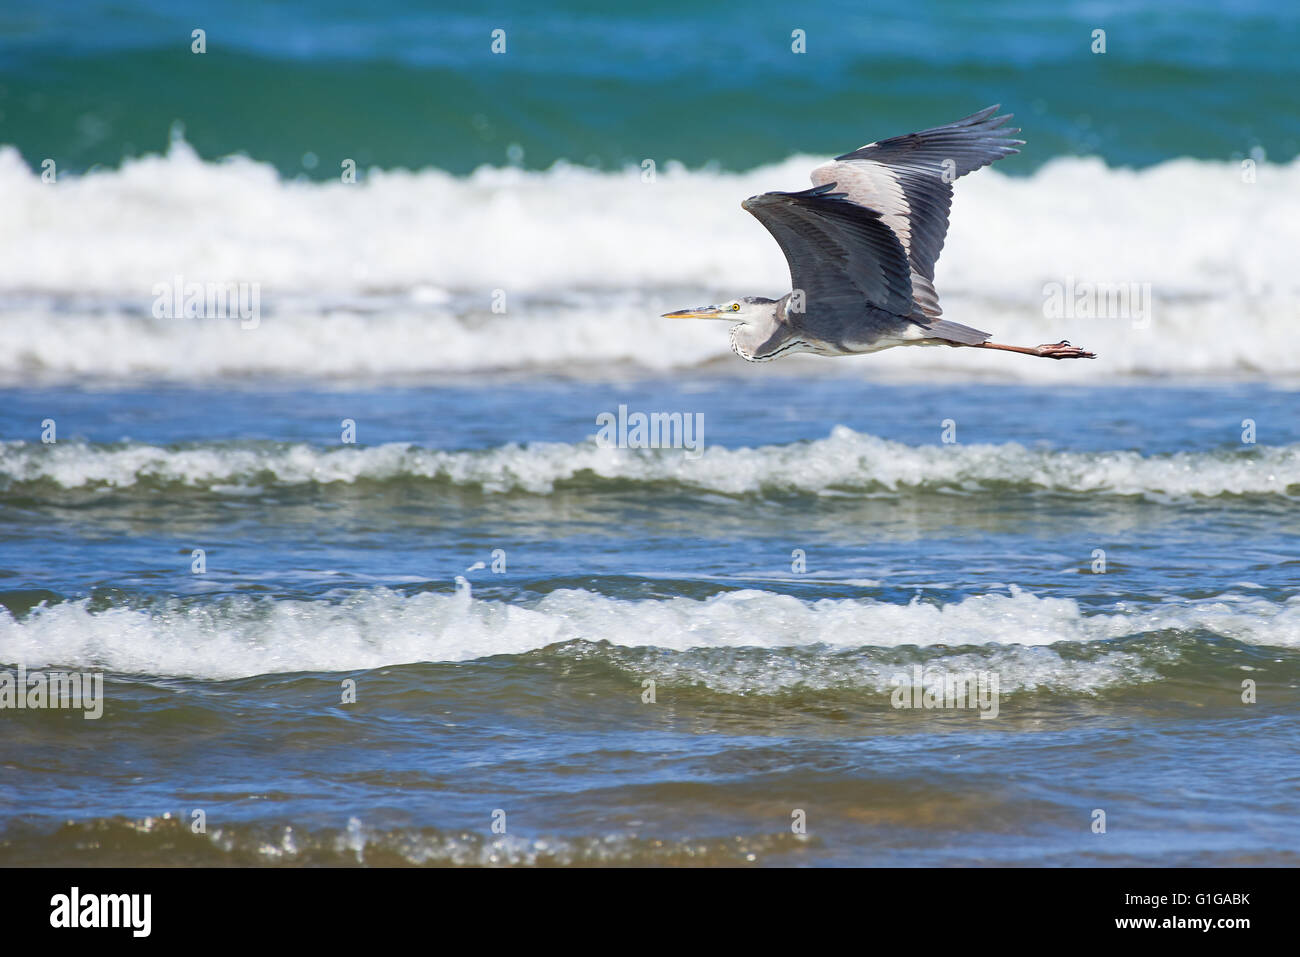 Black headed heron flying low over the waves Stock Photo